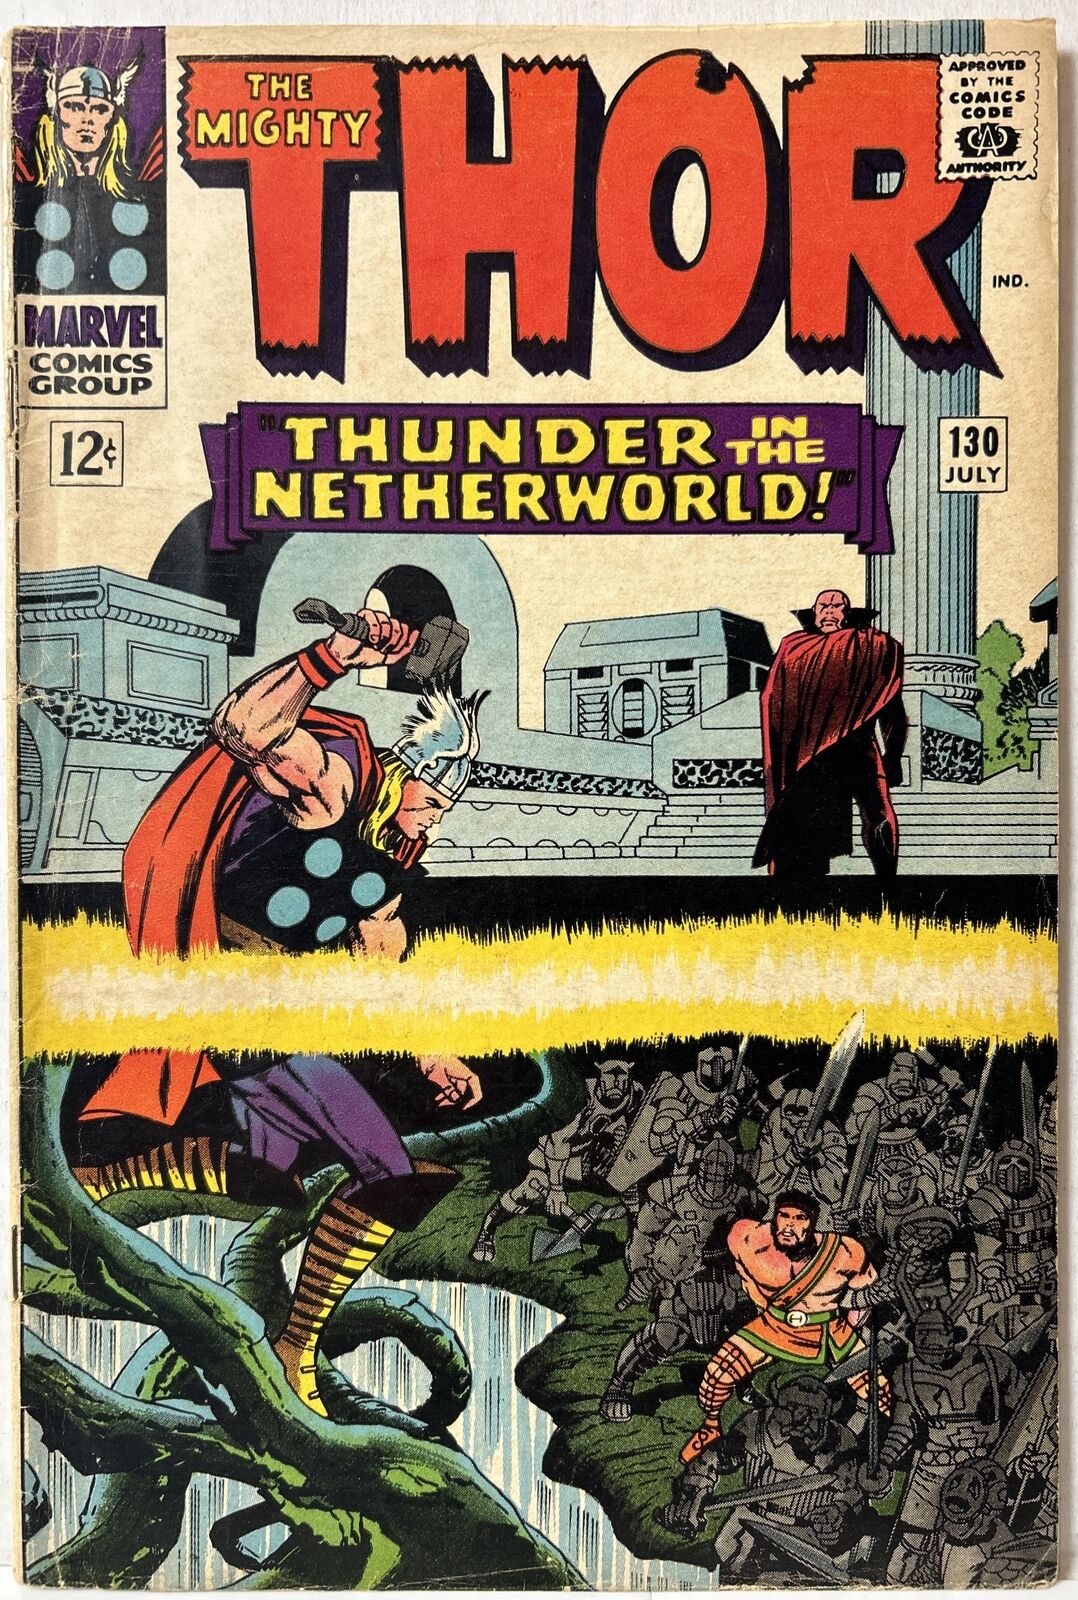 The Mighty Thor #130 Marvel 1966 Pluto & Hercules In Netherworld Lee/Kirby VG-